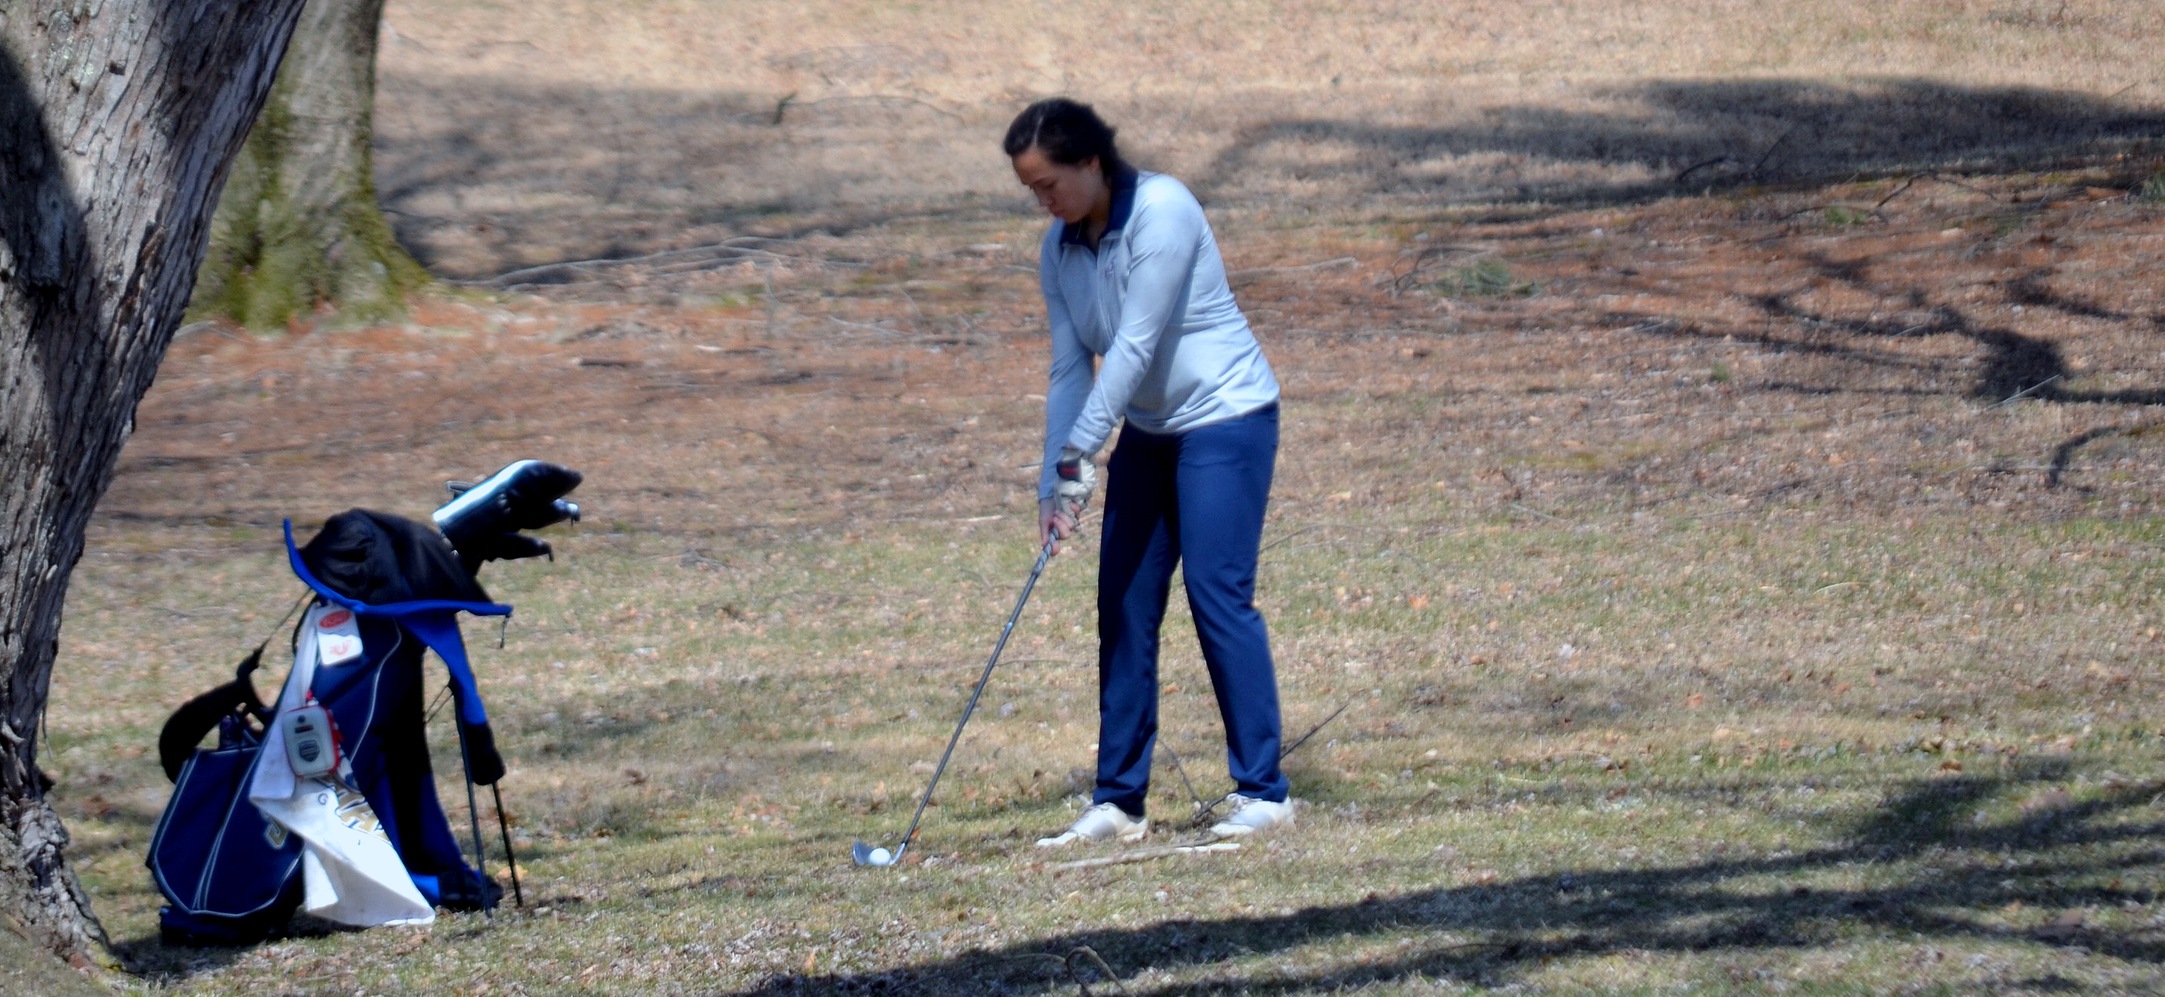 Women's Golf Places Sixth at Knights Spring Invitational